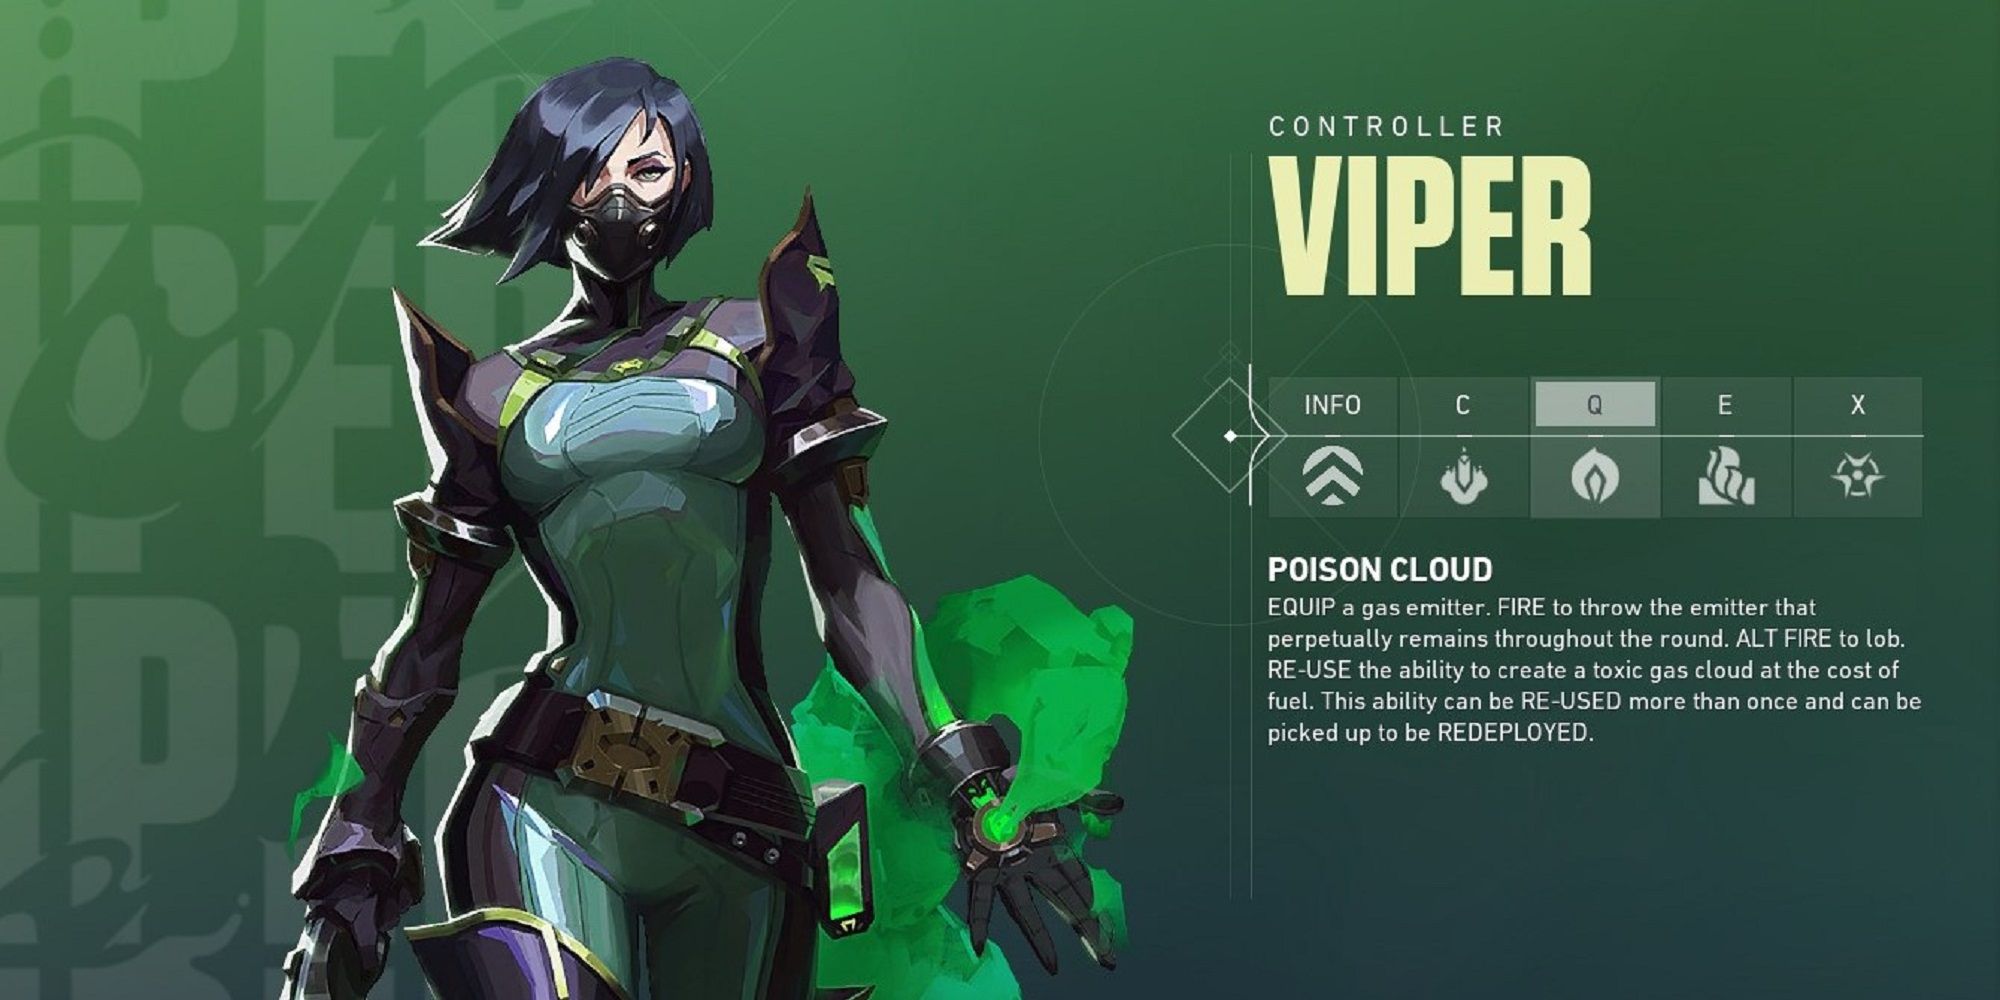 An image of Valorant's Viper agent